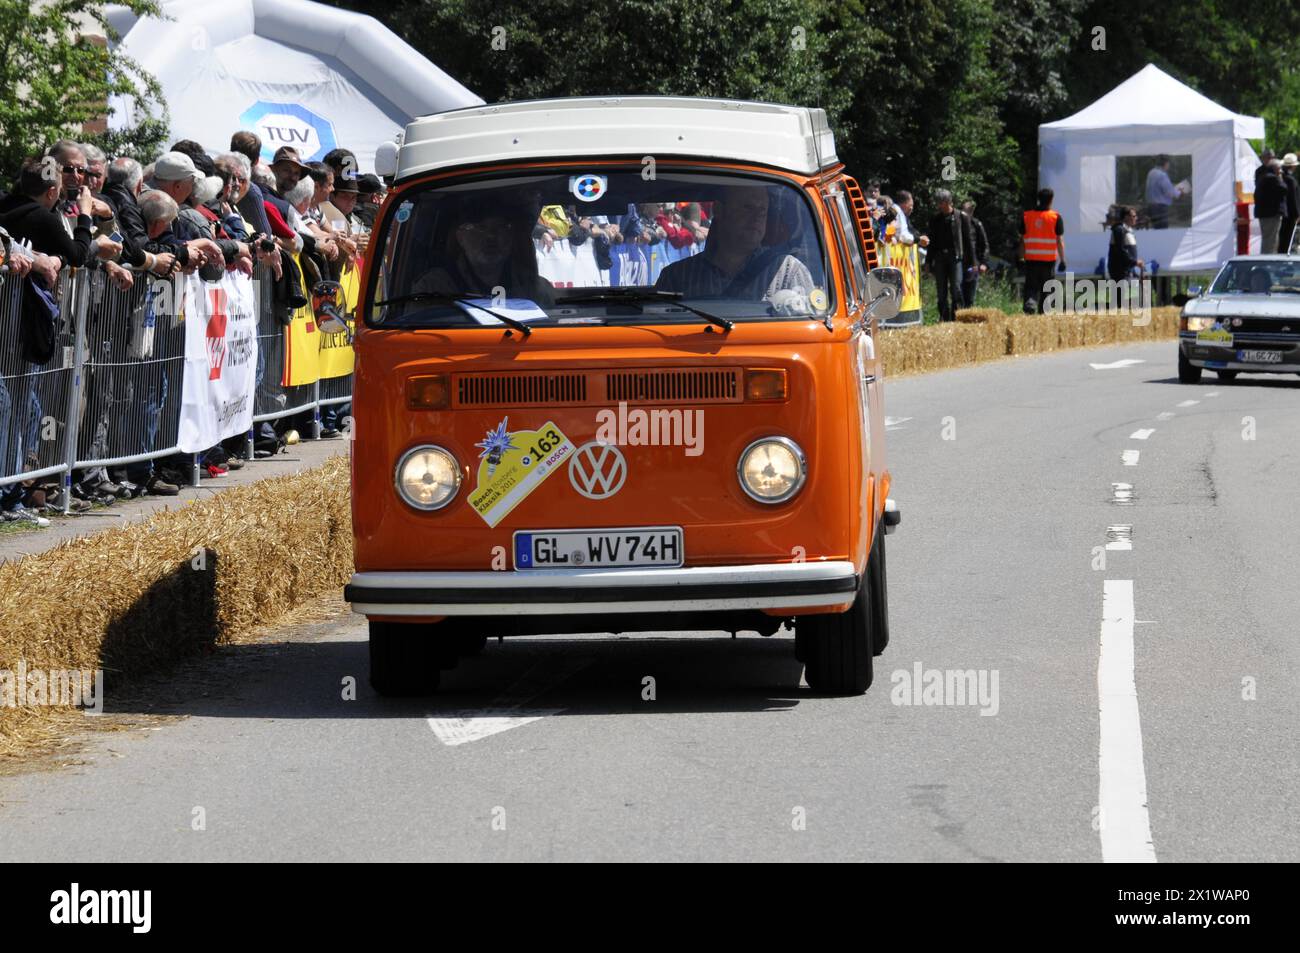 An orange Volkswagen bus drives past a crowd at a race, SOLITUDE REVIVAL 2011, Stuttgart, Baden-Wuerttemberg, Germany Stock Photo